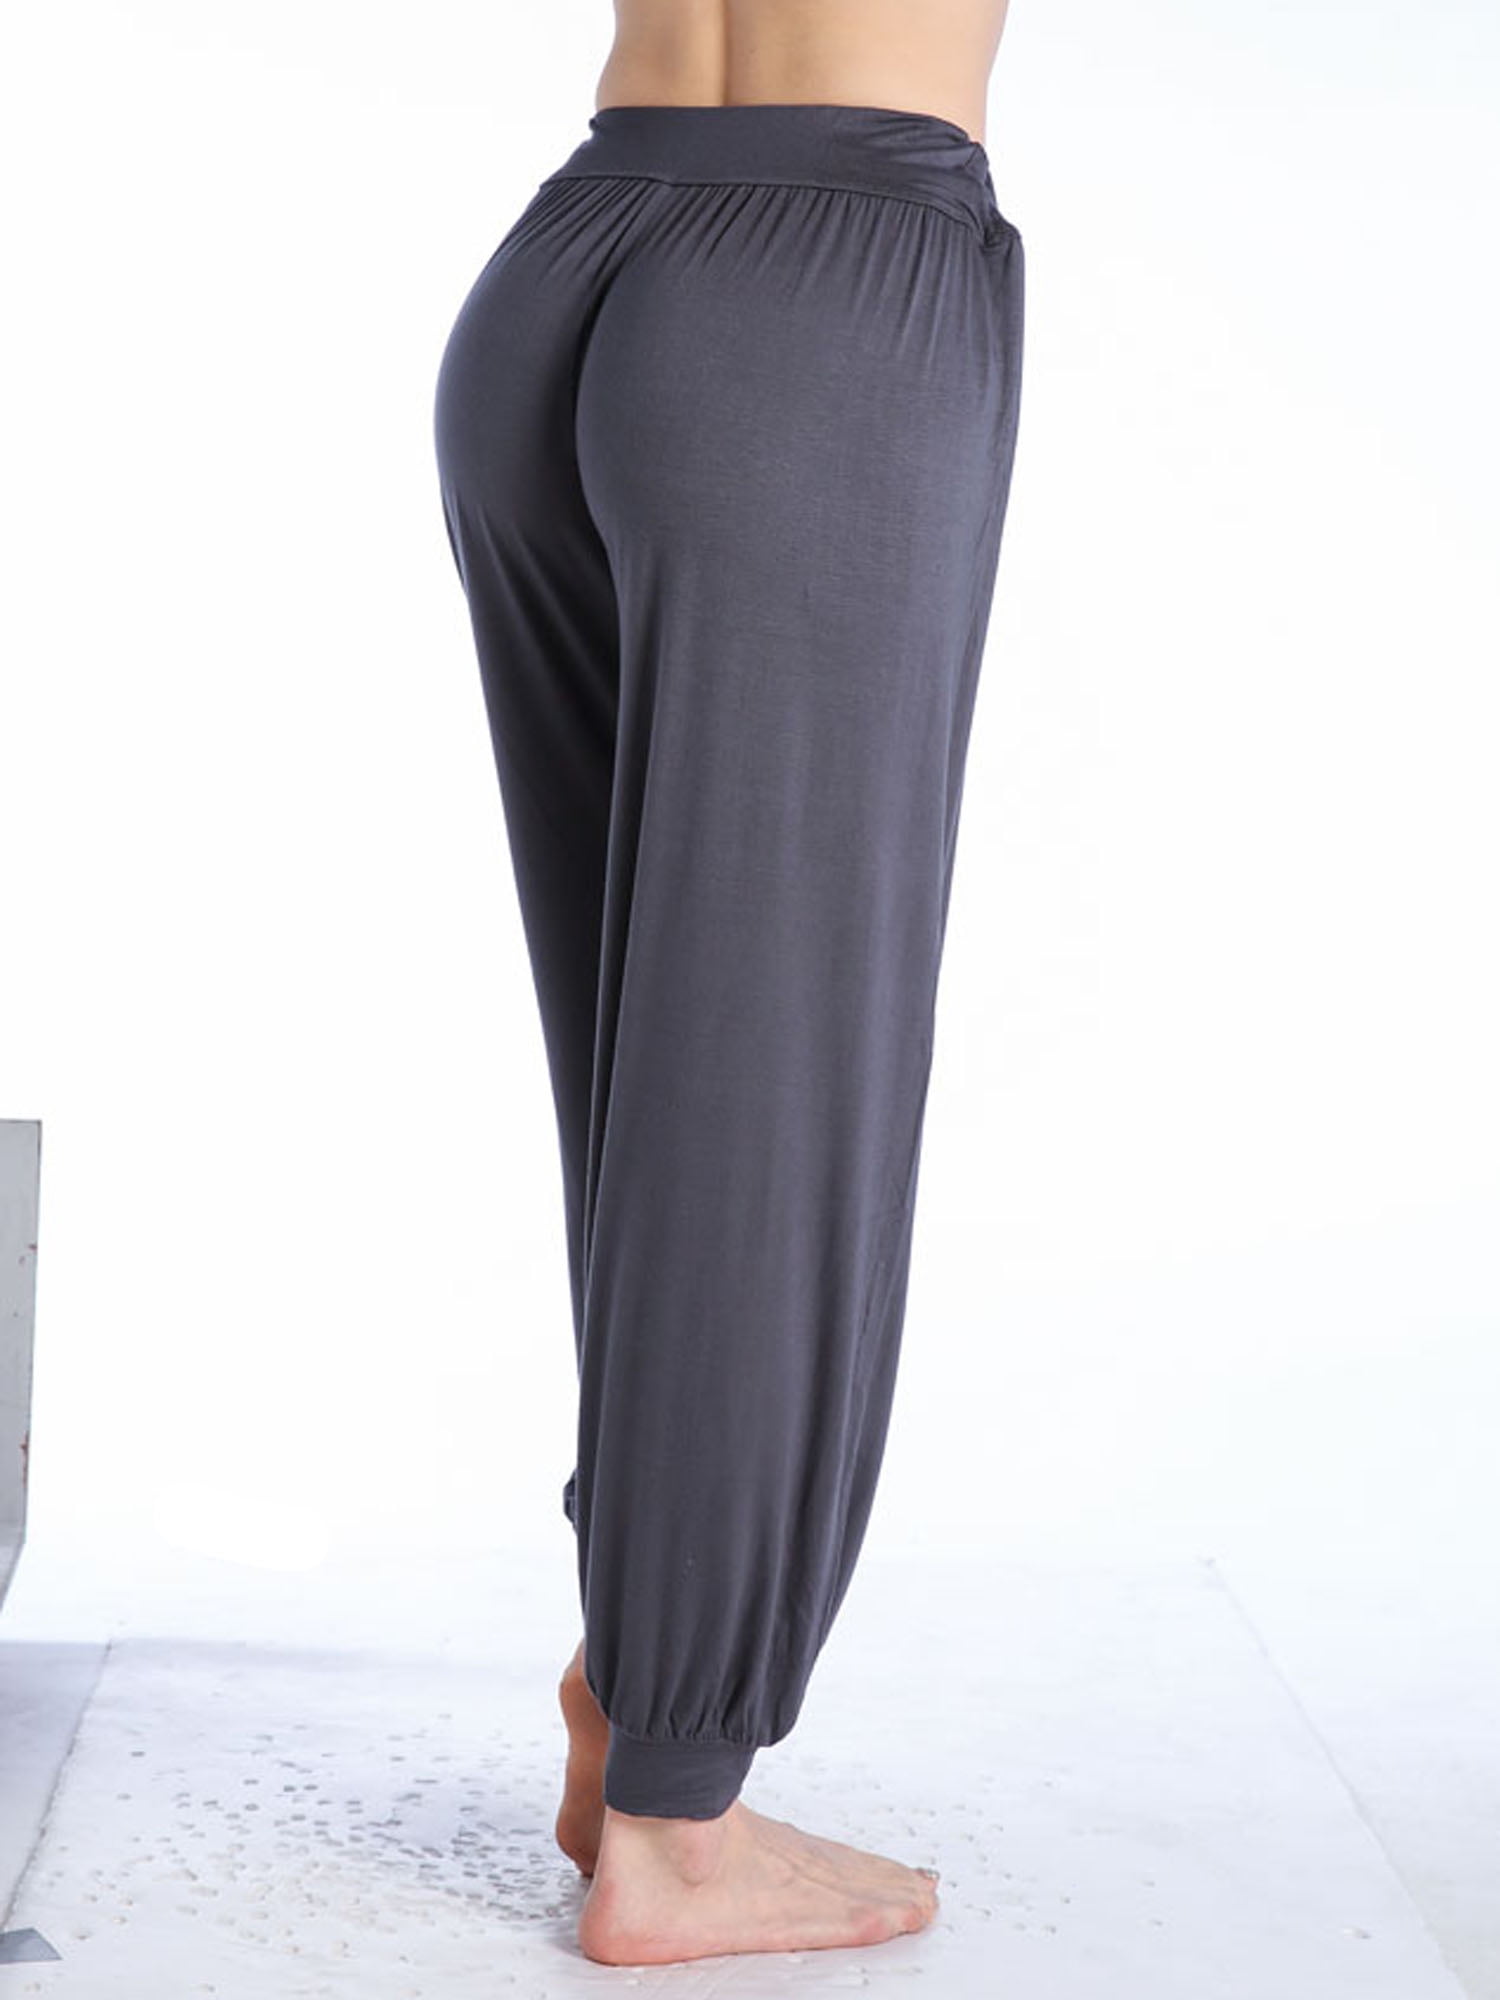 Lu159 Womens Yoga Sports Joggers Loose Fit Drawstring Elastic Waist Gym  Trousers For Ladies For Running, Fitness, And Casual Wear Workout Pant  Trousers From Djyg, $24.91